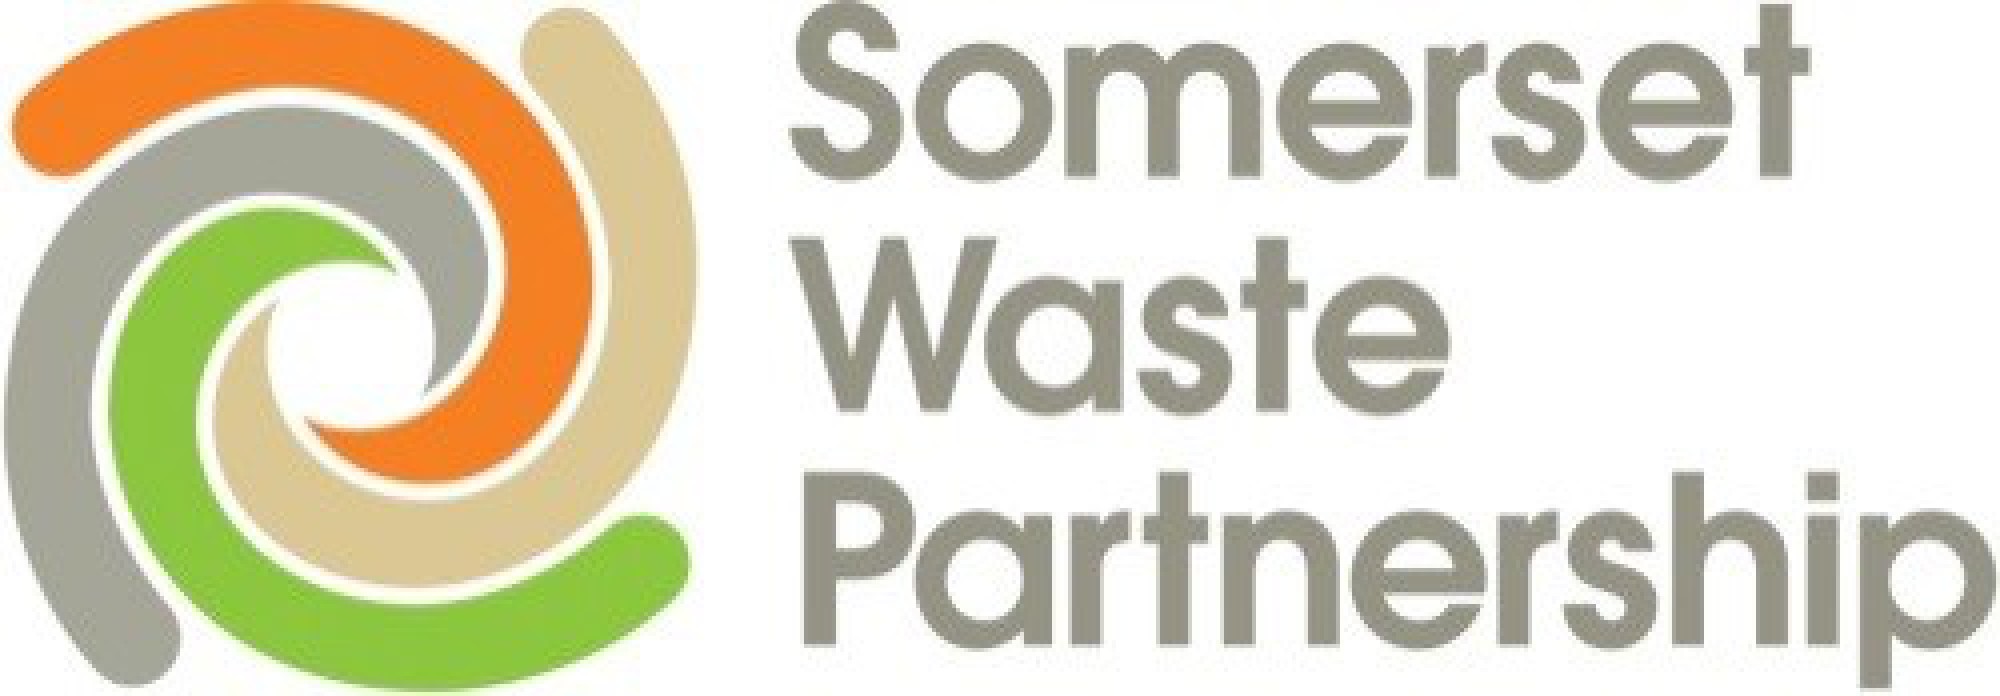 SWP Briefing: Garden waste collections suspended for six weeks